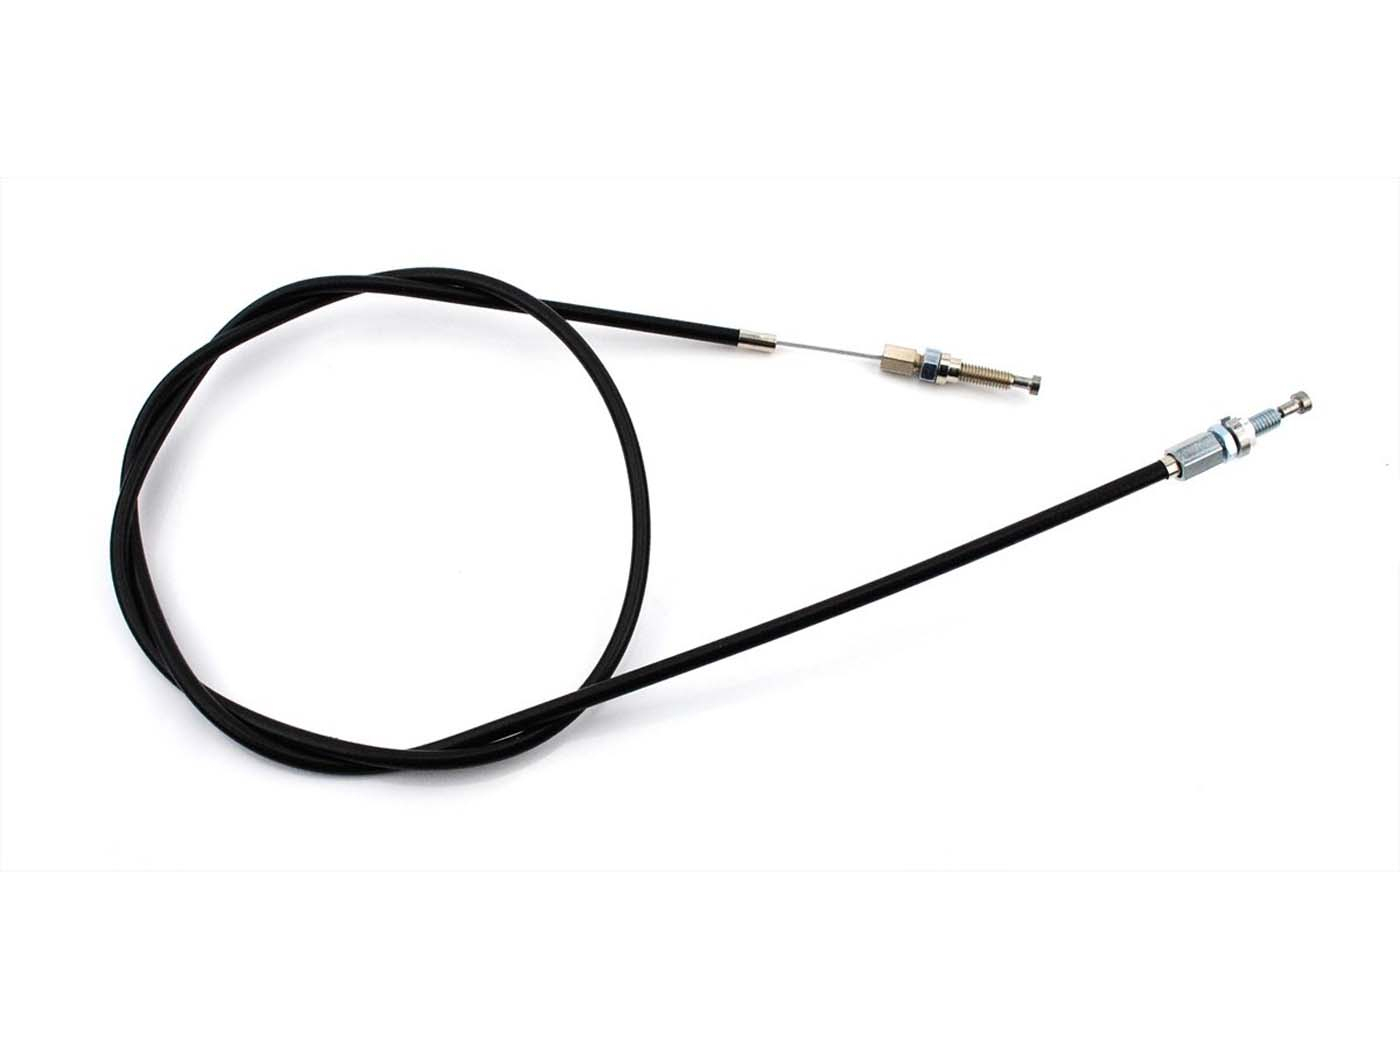 Handbrake Cable, Ready To Install For C 50 Sport Type 517-02, 517-21, GTS 517-40 L 5